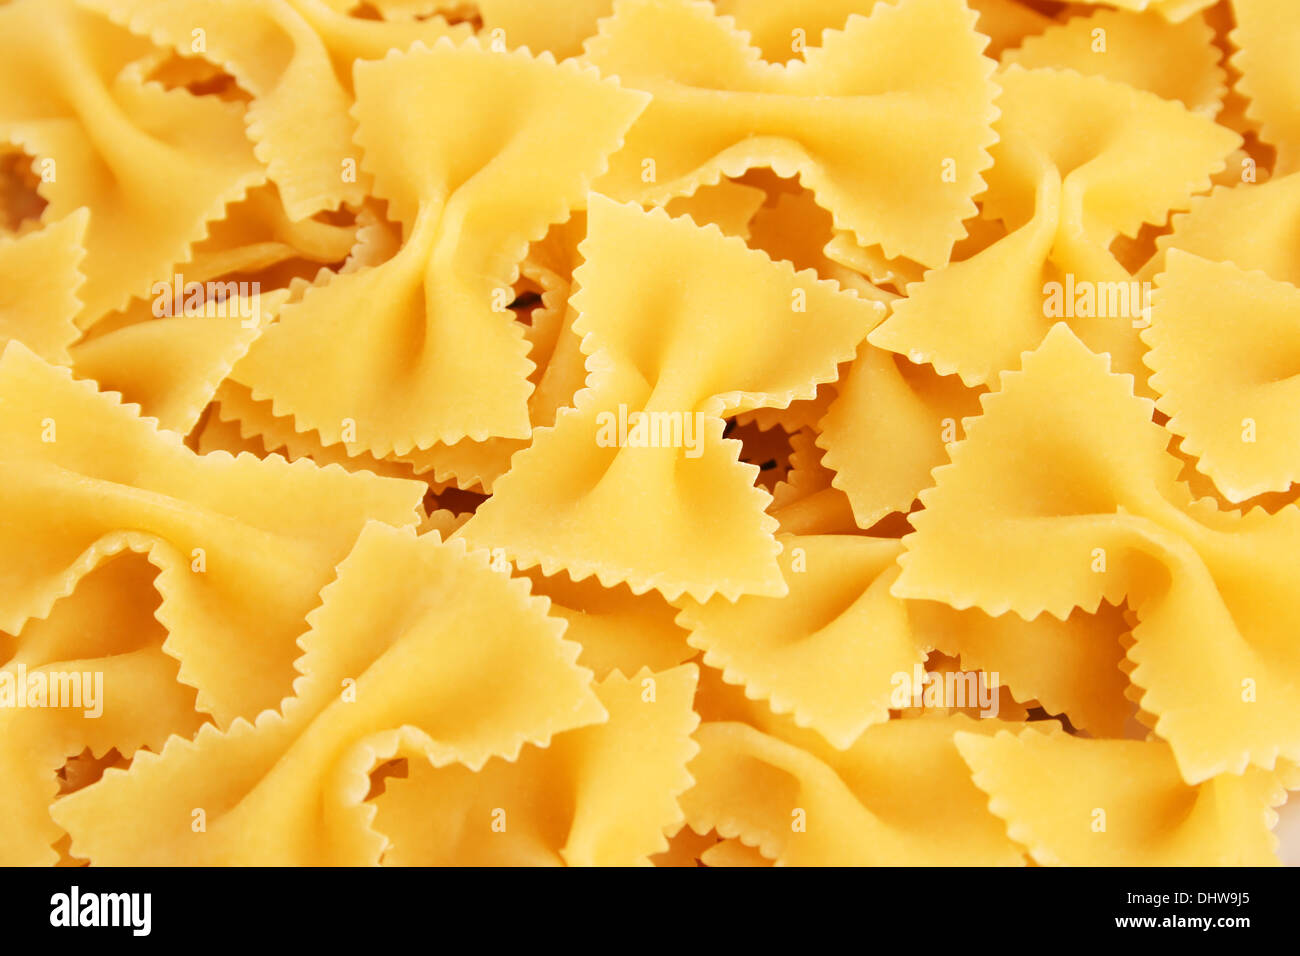 Italian pasta closeup picture as a background. Stock Photo